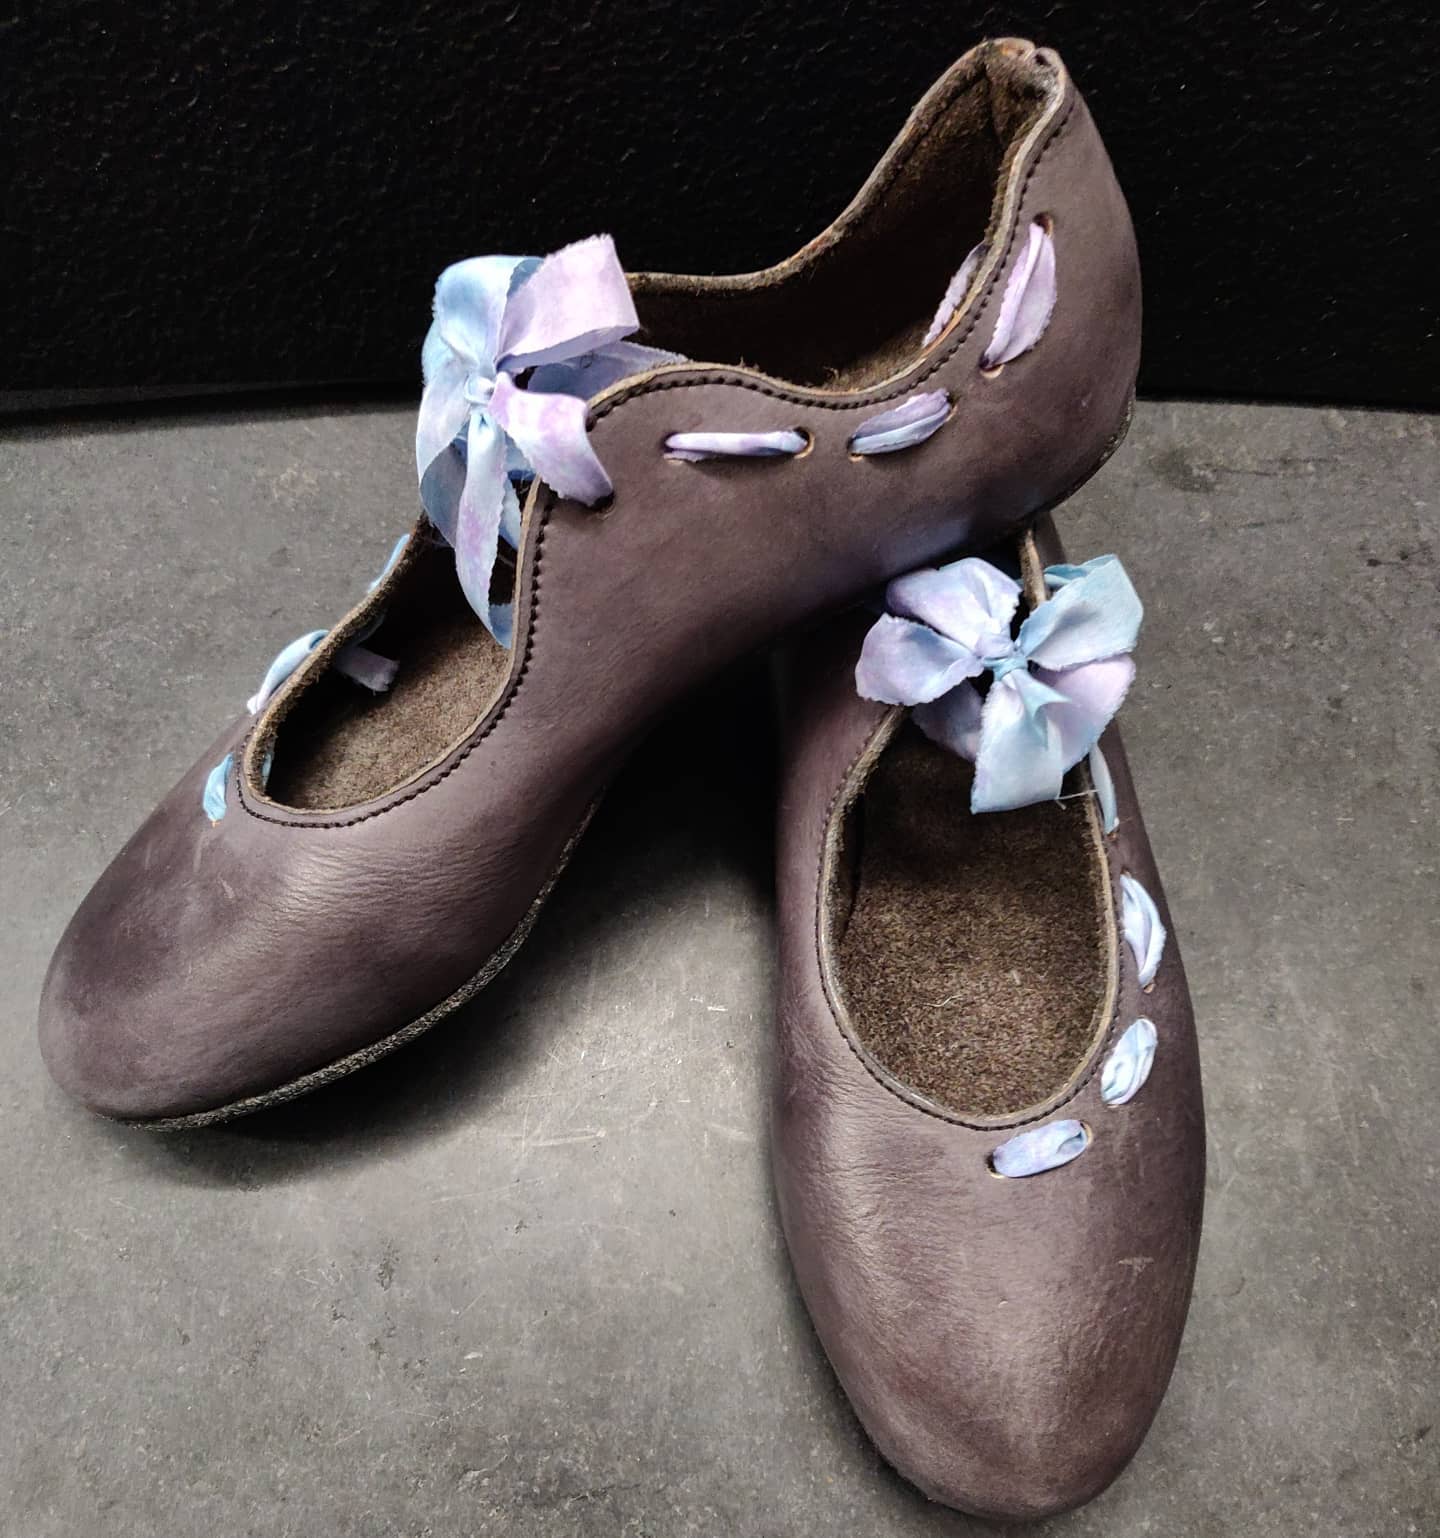 Pair of grey leather flats resembling a ballerina shoe shape. They tie at the front in a bow and the ribbon is asymmetric on each side of the shoe - front chain for the outside and back chain for the inner. The ribbon is hand dyed silk in soft blues and purples.  